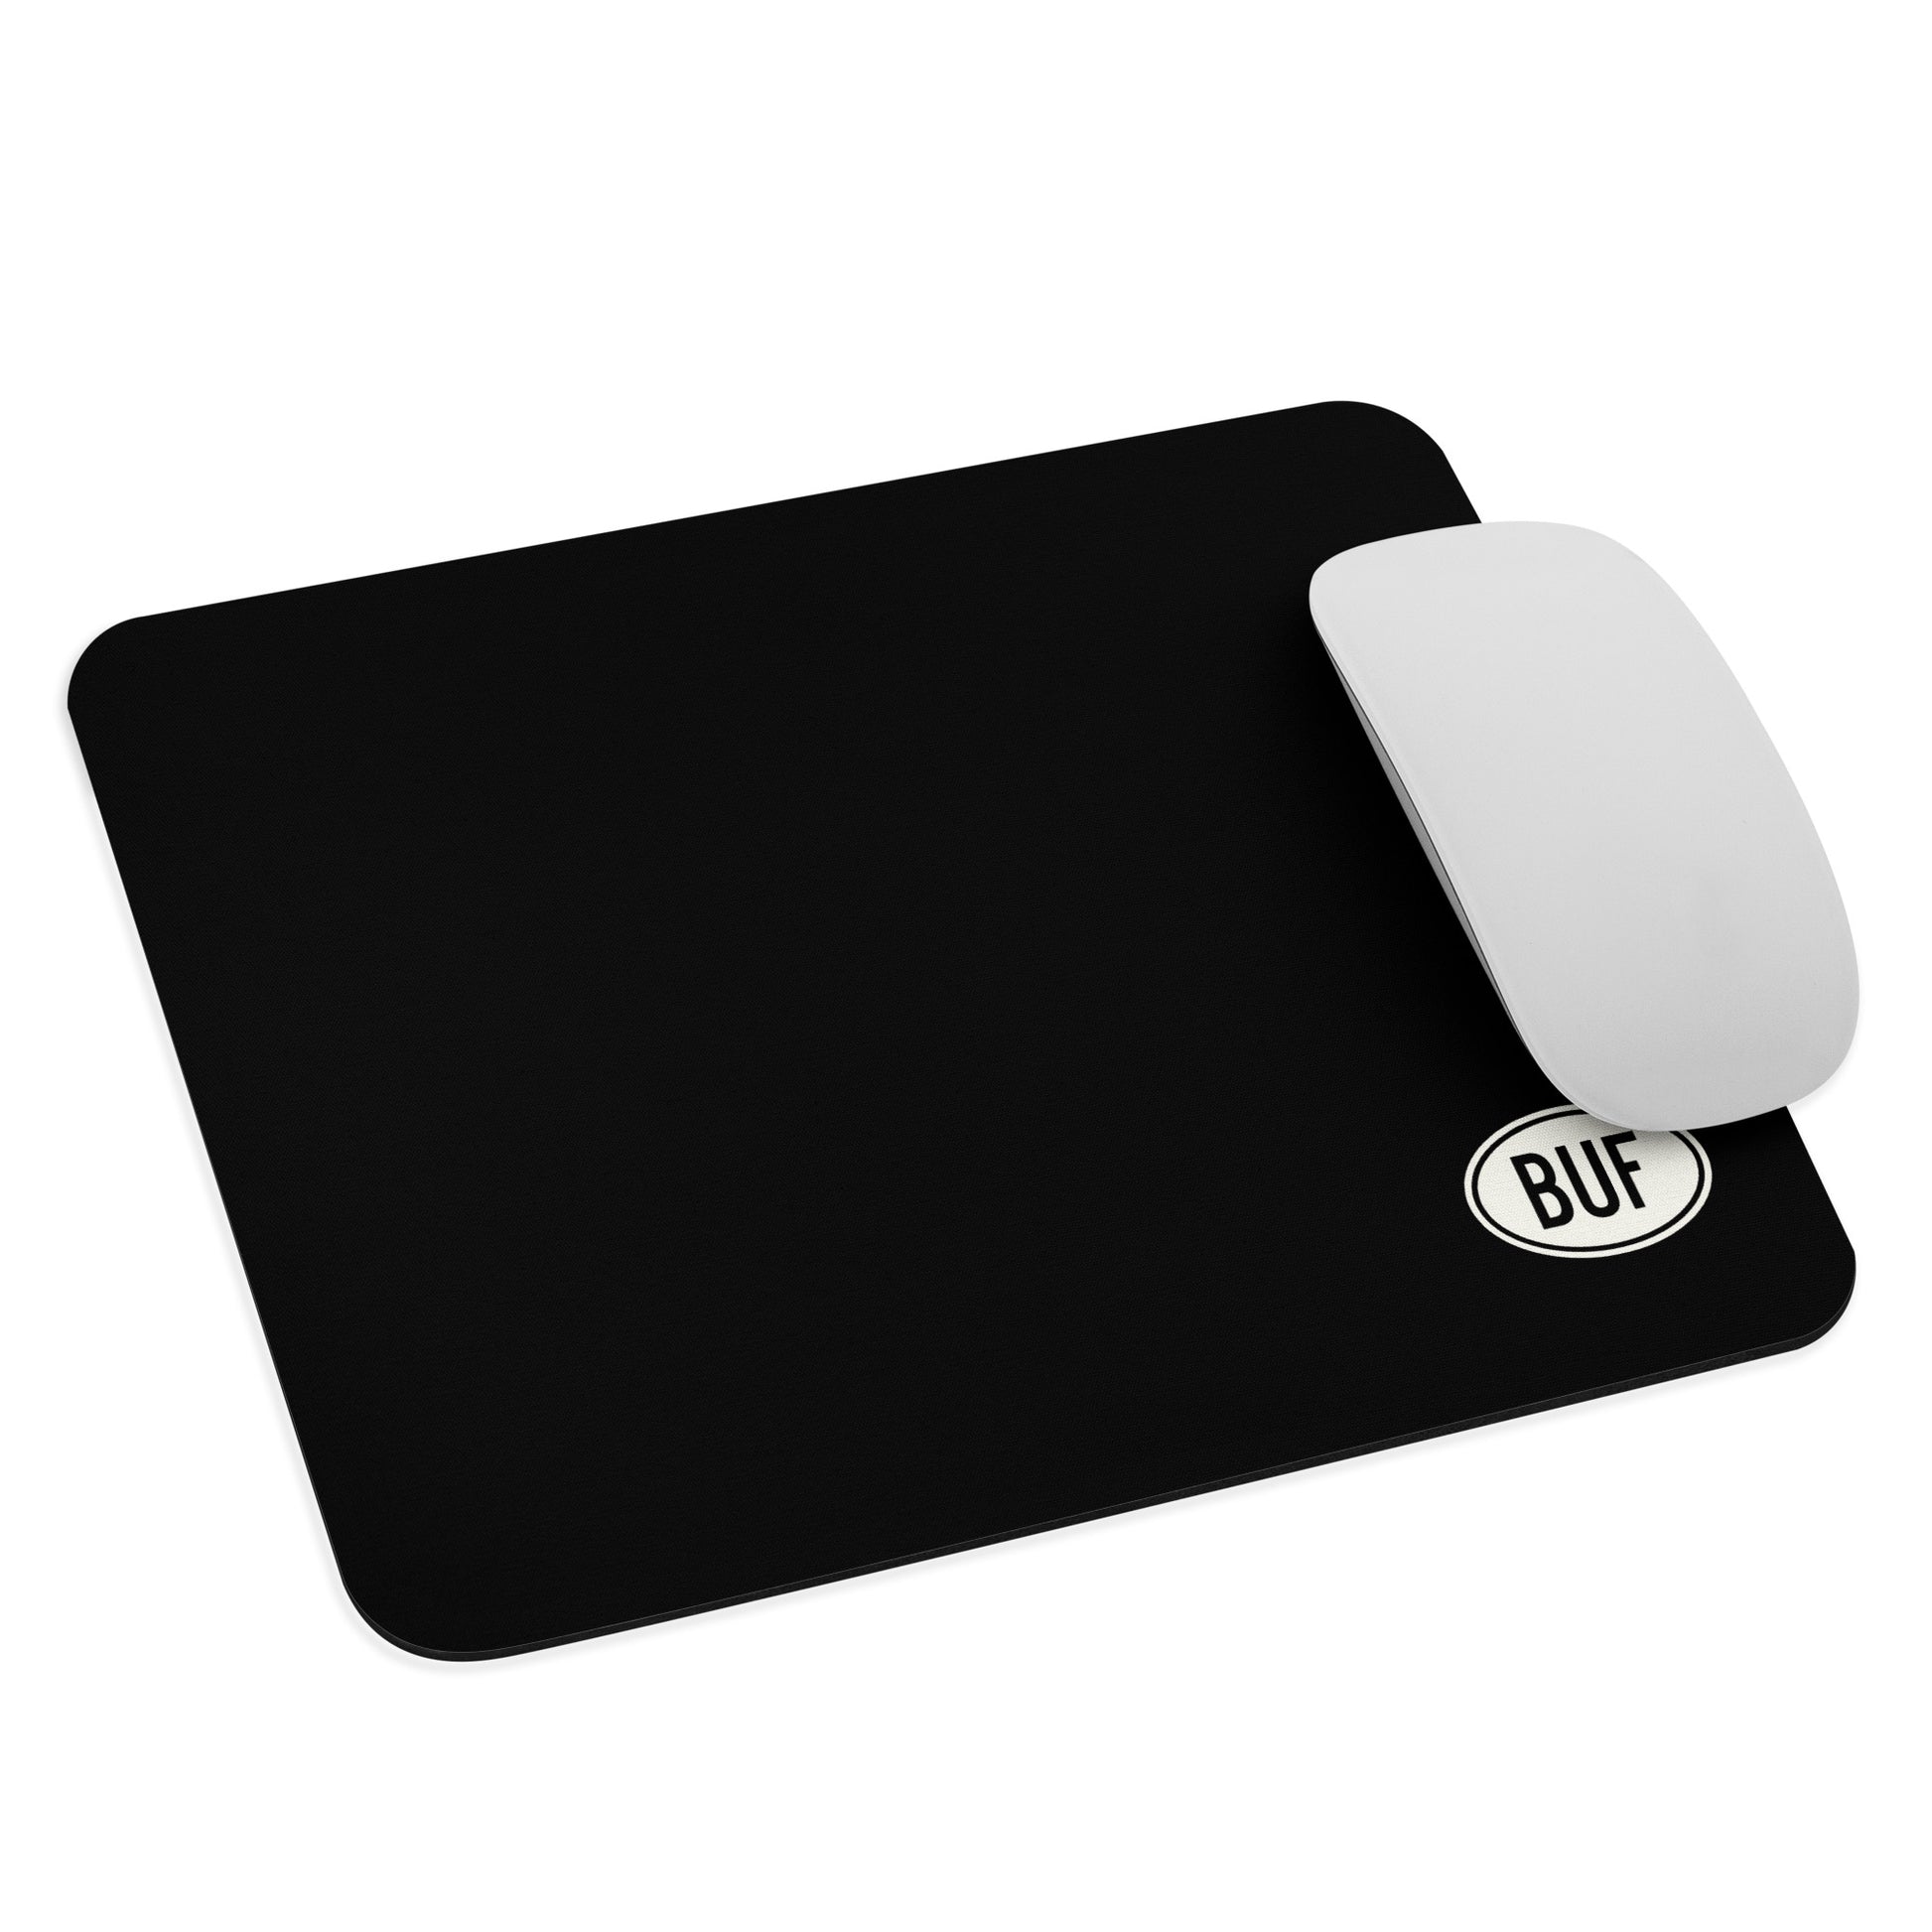 Unique Travel Gift Mouse Pad - White Oval • BUF Buffalo • YHM Designs - Image 03